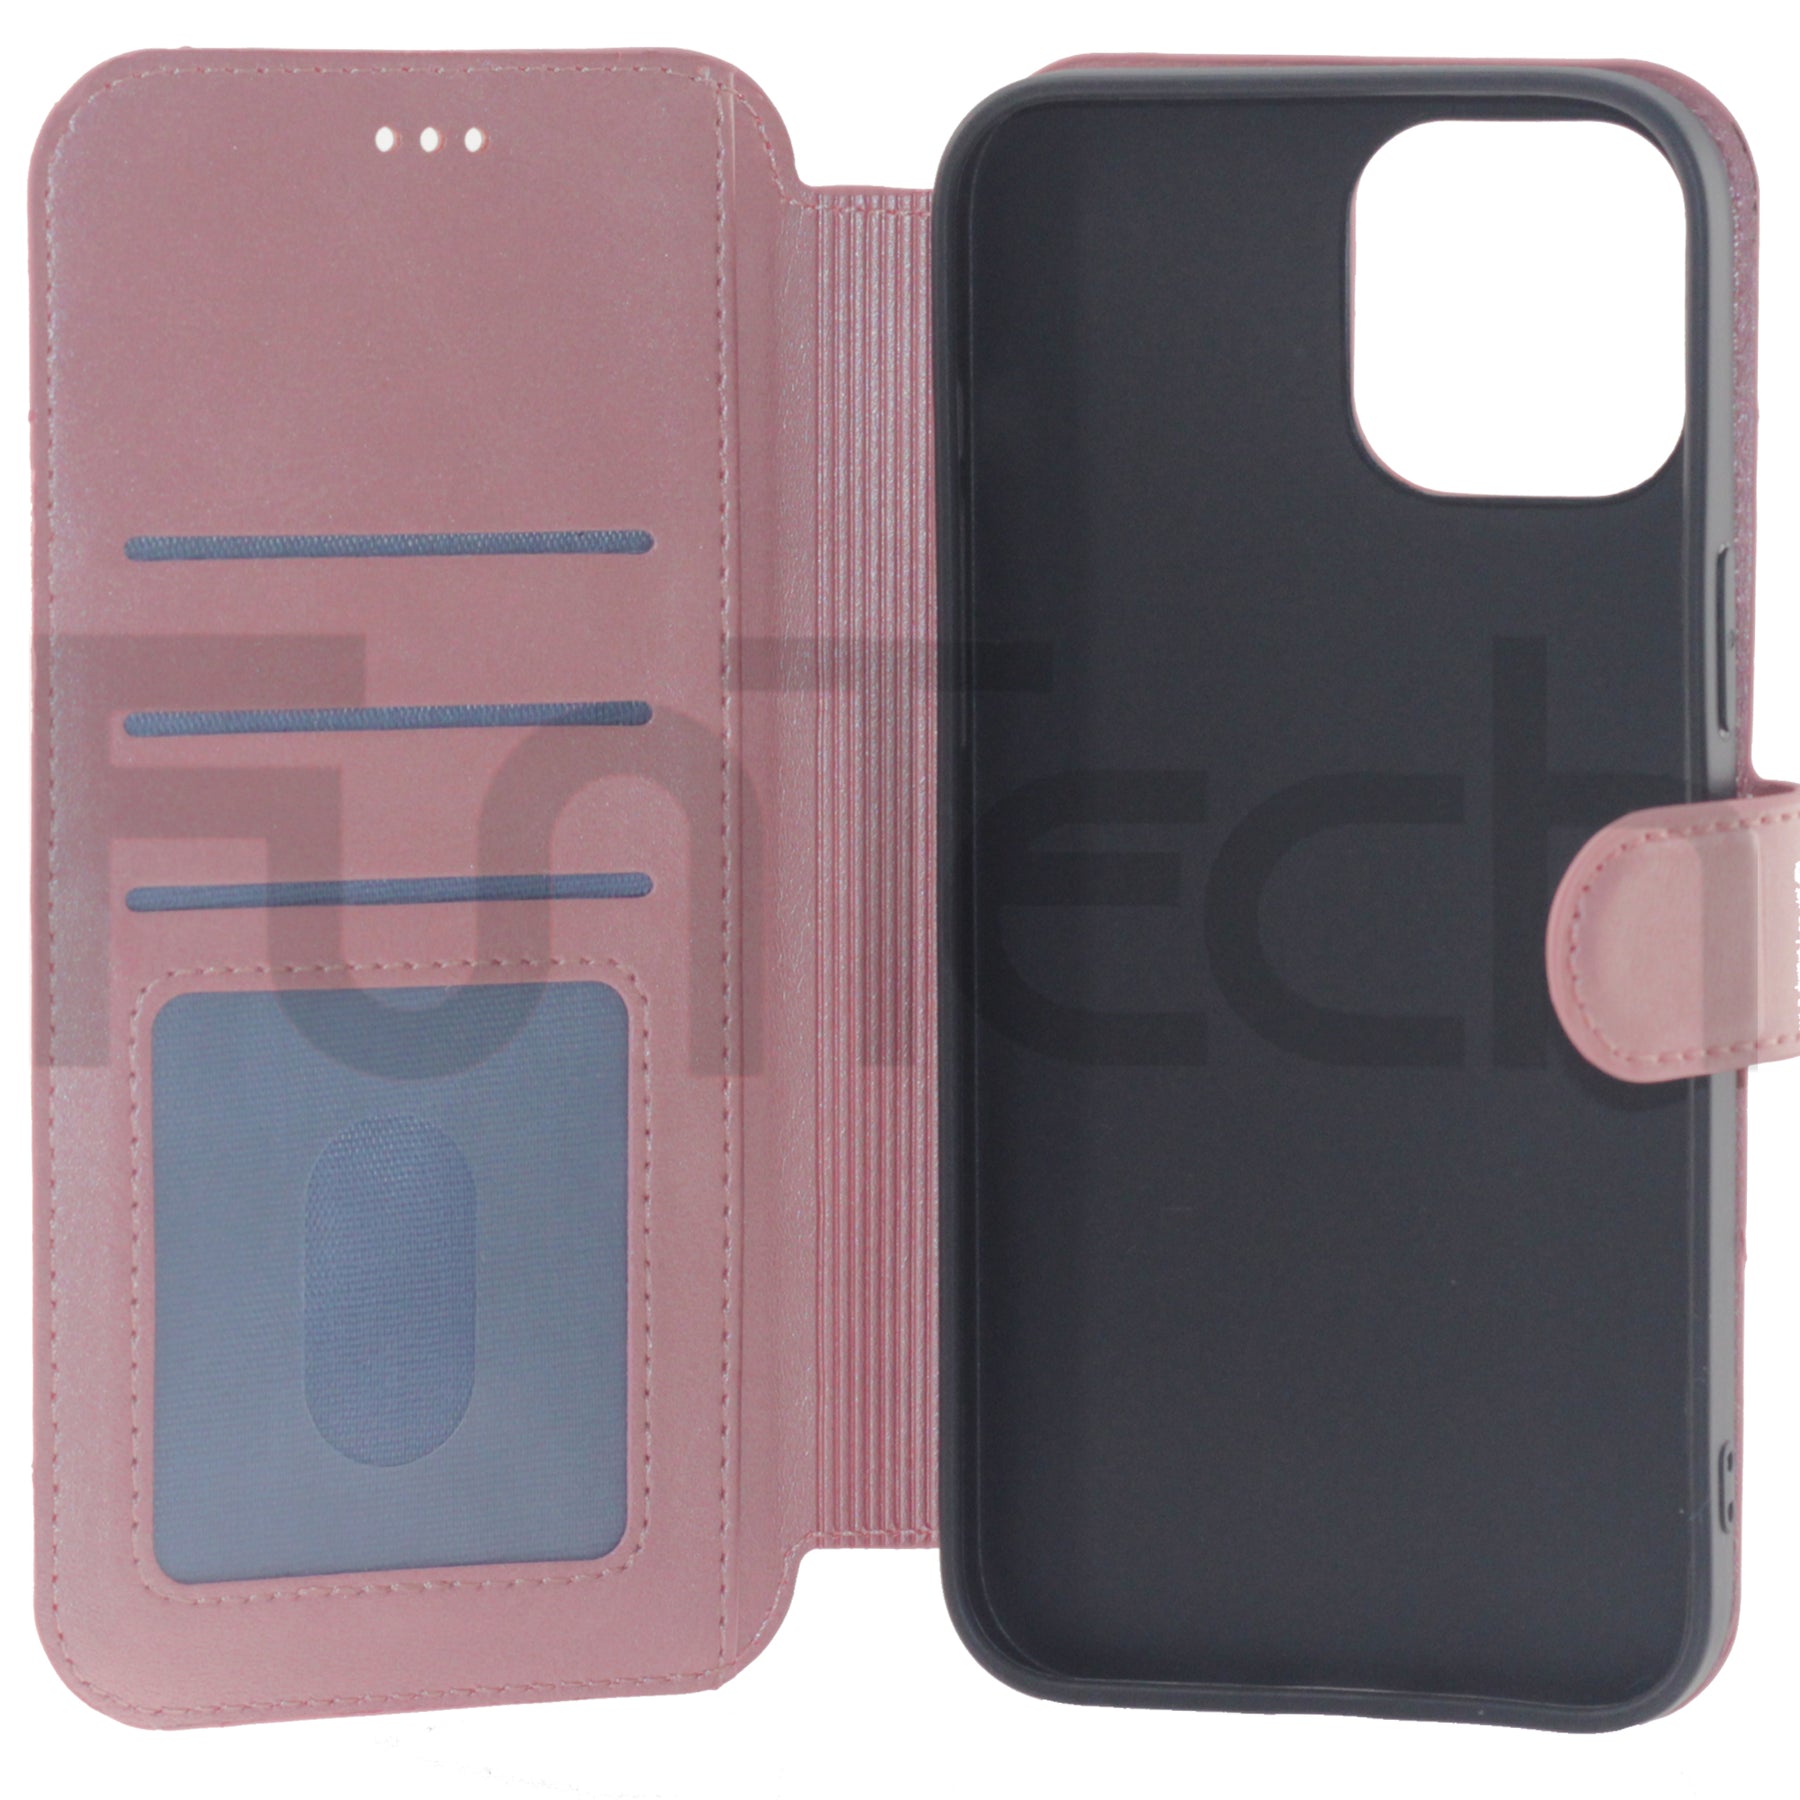 iPhone 13 Pro Max, Case, Color Pink.